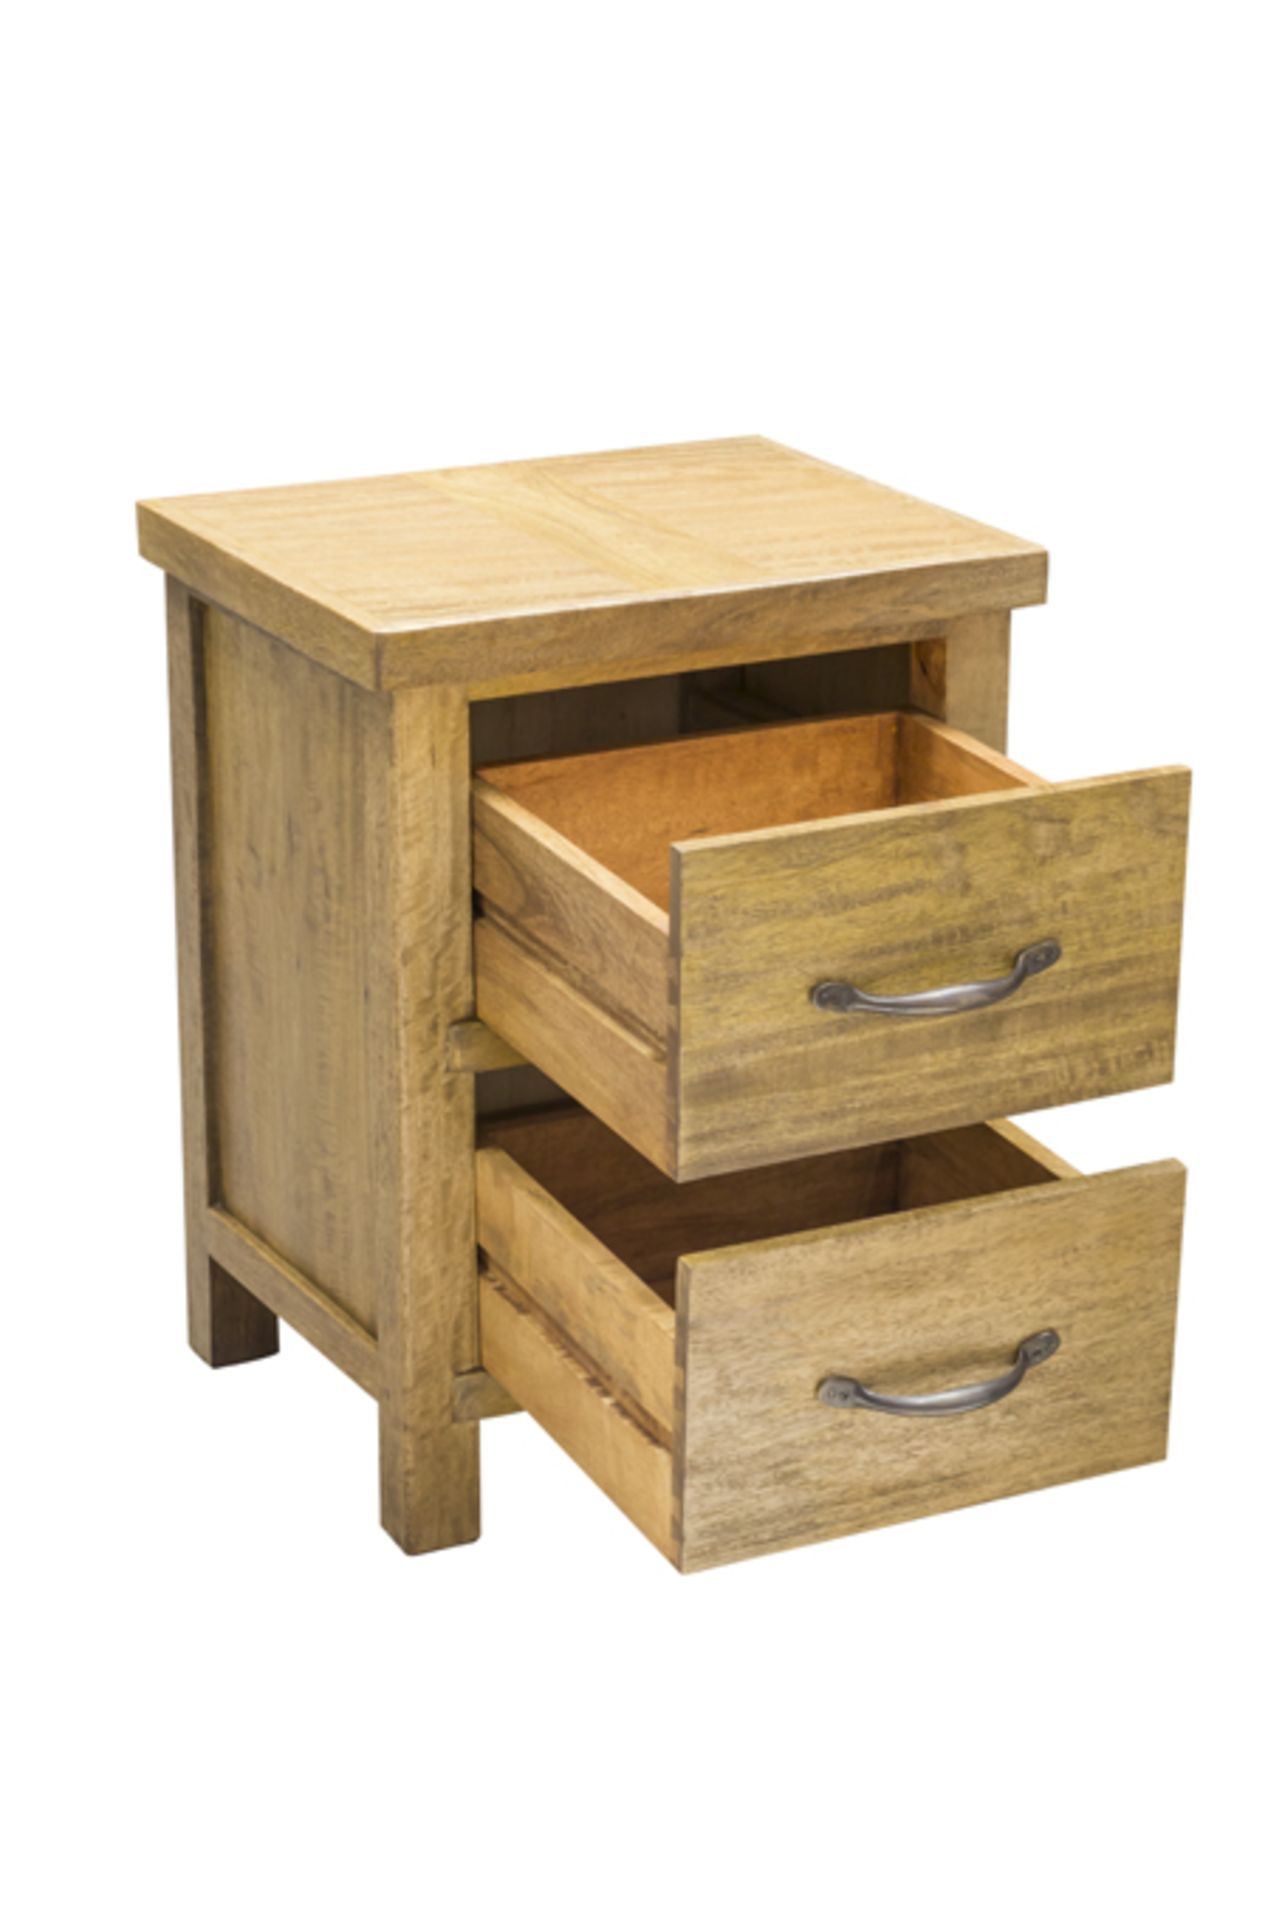 A Pair of Soho Solid Wood Bedside 2 Drawer Bedside Table will complement your bedroom scheme - Image 3 of 6